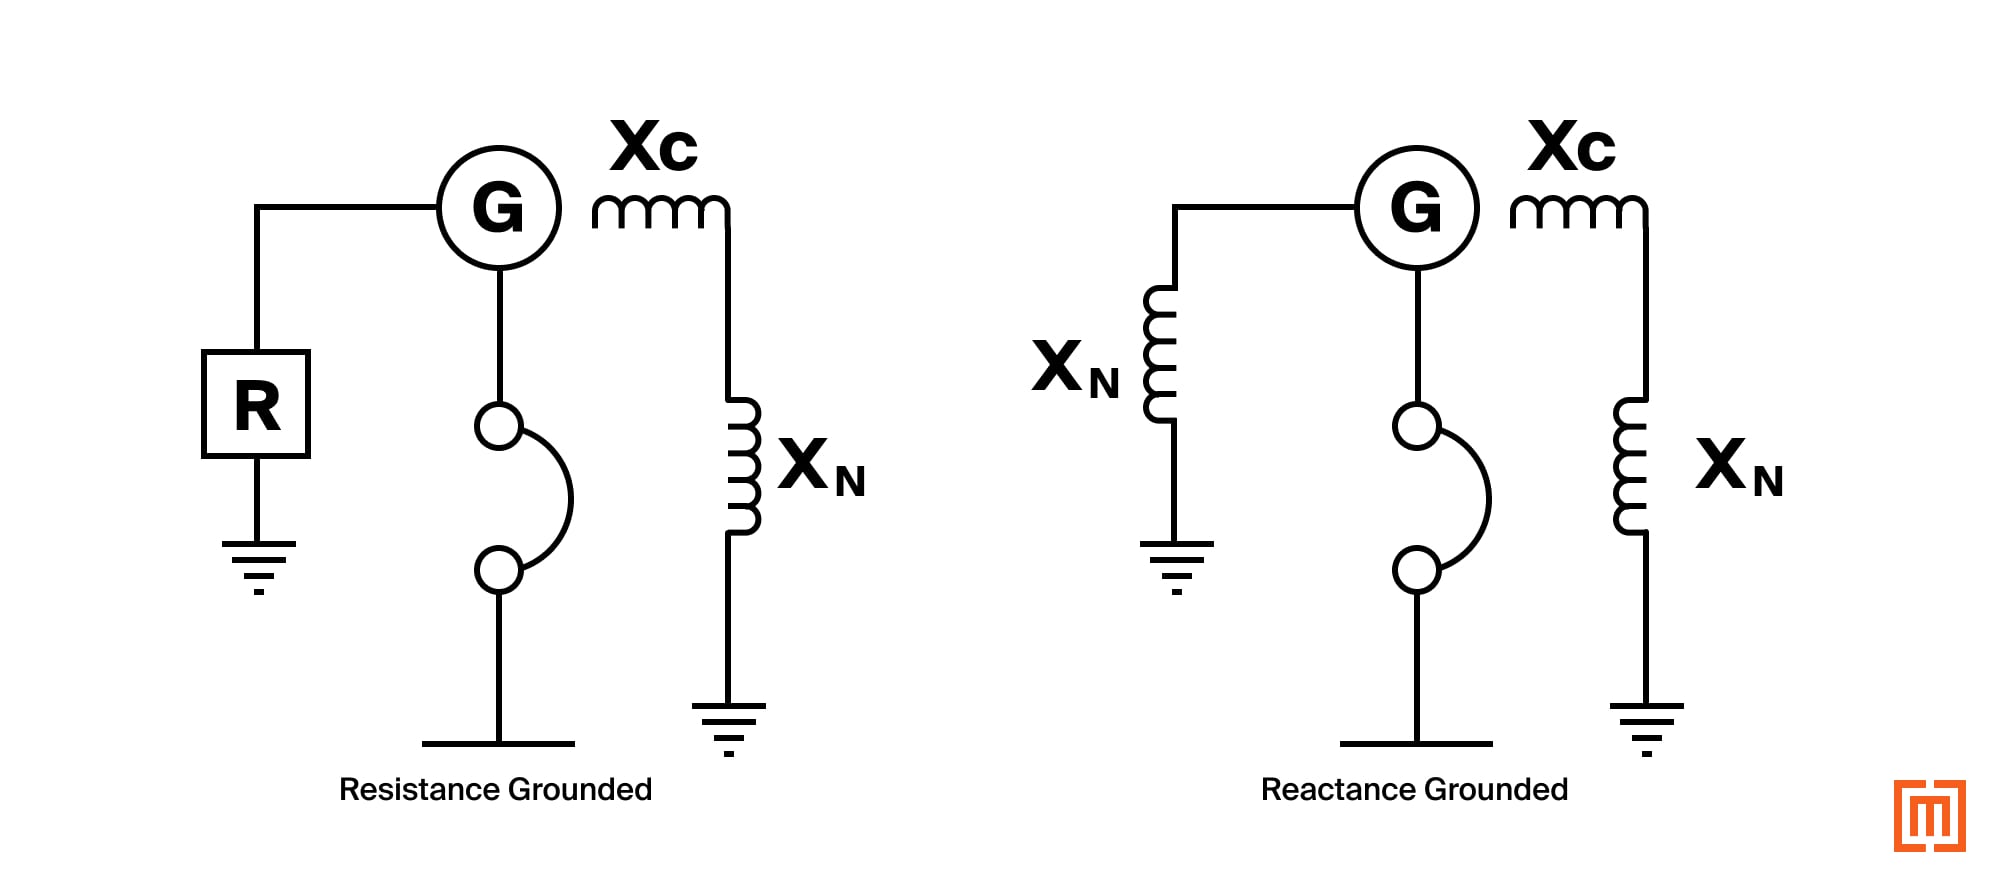 Diagram of reactance vs. resistance grounded systems